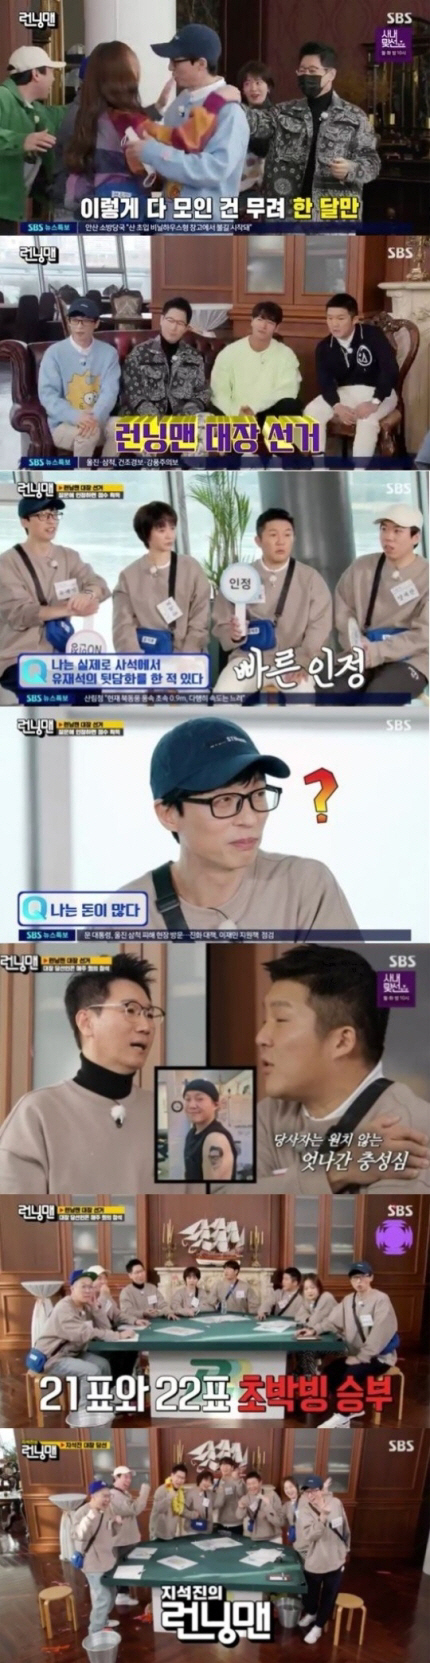 SBS Running Man Yoo Jae-Suk is in danger of revealing propertyRunning Man, which was broadcast on the 6th, kept the top spot in the same time zone with 3.2% of the target index 2049 ratings (hereinafter based on Nielsen Korea metropolitan area, households), and the highest audience rating per minute jumped to 7.9%.On this day, the members met in full in five weeks due to Corona 19, and they were happy to show off their high tension from the opening, but they attracted attention by mentioning what do you do when you play.What do you do when you play?, Running Man , due to the confirmation of the members, the recording schedule was changed, and Kim Jong-kook, who encountered it, said, What do you do when you play, is the main PD from Anyang?Yoo Jae-Suk said, I told you to go out of what do you play and I do it here.On this day, Race was decorated with Captain Election Race, which selects Running Man for four weeks, and comedian Jo Se-ho was a guest.When you become the Running Man captain, you will be marked for a month as Running Man of OOO. You will receive a special treatment for age notices, a lunch menu decision on the same day, a gift of luxury bottled water during recording, and a raise in the performance fee.However, during the term, you should participate in the production team meeting held at Mokdong SBS once a week to provide ideas.The first mission was a game that took one point if you admitted the questions as an unconditional yes entertainment hearing.With interesting questions pouring in, Jeon So-min did not acknowledge the question Im afraid Im going to confess to Yang Se-chan, and Jo Se-ho has actually had a back-to-back conversation of Yoo Jae-Suk in private, Jeon So-min and Song Ji-hyo both dont get my last name, Kim Jong-ho I did not want to see the cook, I hesitated to meet Running Man, Entertainment ability is senior, Ji Suk-jin is a great man and role model to me I swept the score.In particular, Yoo Jae-Suk acknowledged the question I have a lot of money, but was greatly embarrassed by the fact that he had to disclose his property, so Jo Se-ho said, There is as much as the prize money of Squid Game, and Yoo Jae-Suk raised suspicions that Yoo Jae-Suks property is 45.6 billion won.The members tried to find out the property of Yoo Jae-Suk with questions such as Is it possible to give you this from here, Can you live in your 30s? And Yoo Jae-Suk is right.The rich are right! said Yoo Jae-Suk, frustrated that if Im not rich, I swear. Others... Super doesnt need to be in their 30s.In the end, Yoo Jae-Suk declared NO recognition in the ongoing attack.In the next mission, Minica Race, Jo Se-ho of the two decided to resign, with Jeon So-min and Jo Se-ho winning.Jo Se-ho backed Yoo Jae-Suk; after that Song Ji-hyo resigned and declared his support for Haha and entered the final campaign with everyone reluctant to take over as captain.Ji Suk-jin felt that he was not impressed with his support tax and laughed at the members, saying, I really do not have time.The scene won the best one minute with a highest audience rating of 7.9 percent per minute.Eventually, due to Jo Se-hos vote in the final vote, Ji Suk-jin was elected to the Running Man captain over Haha by one vote, and the Ji Suk-jins Running Man era was launched.